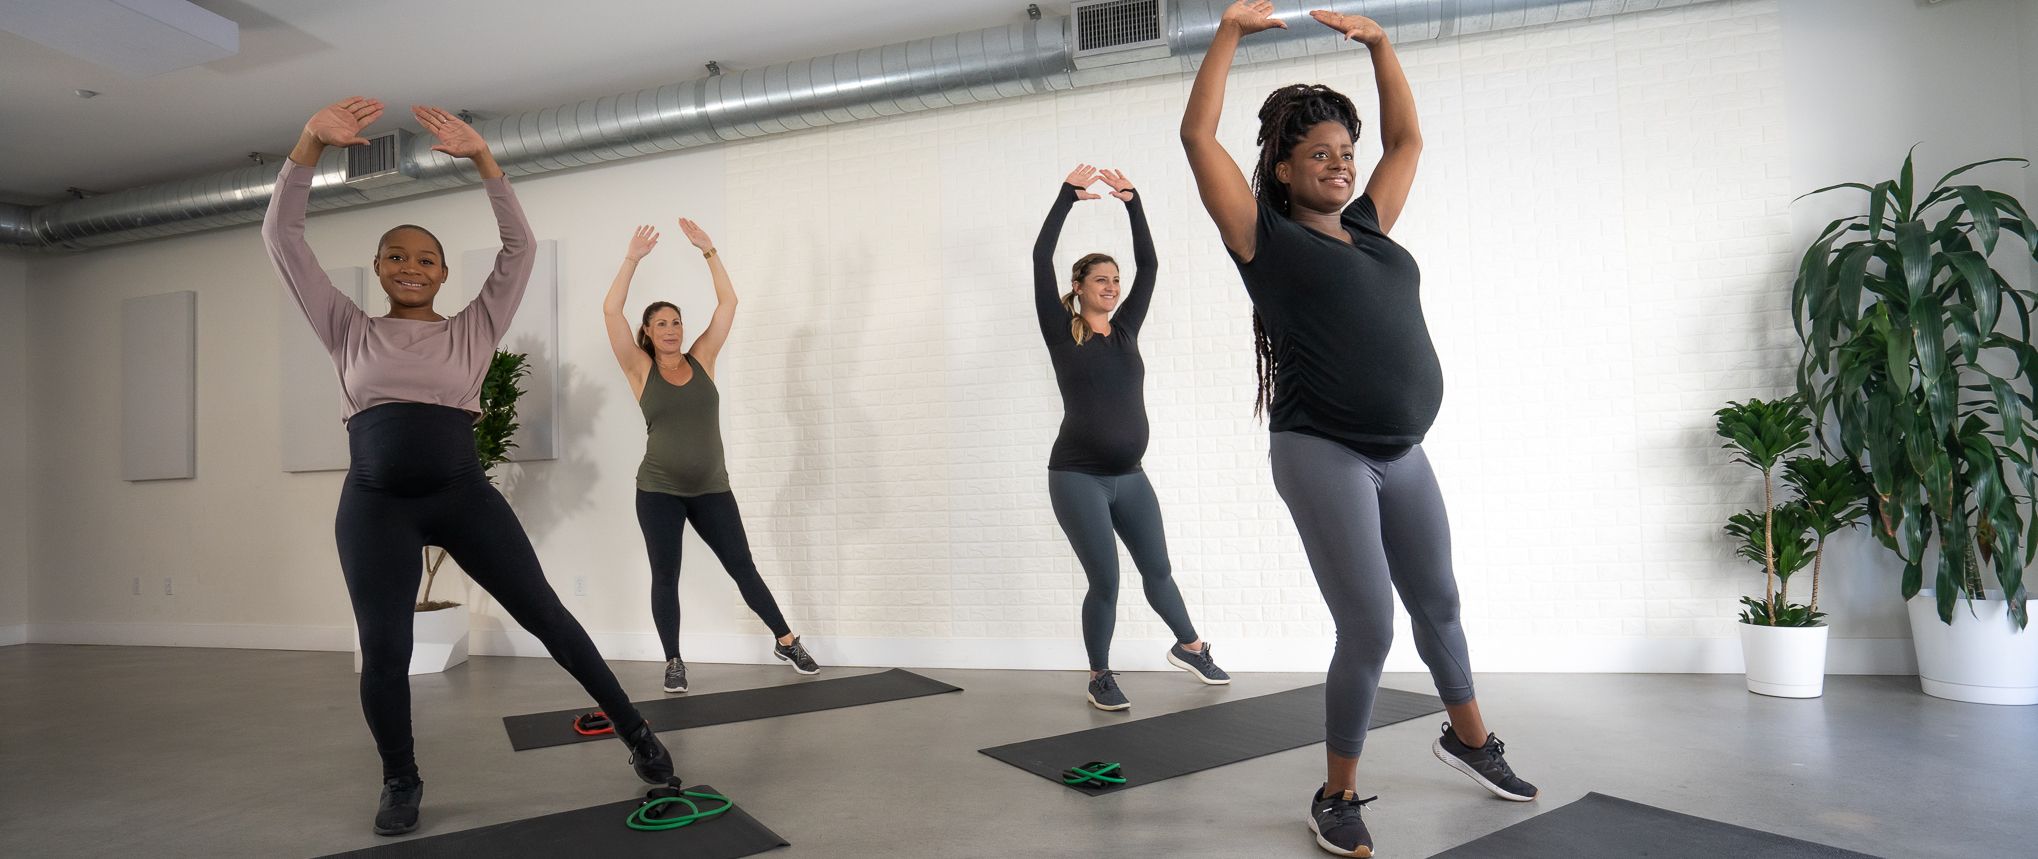 Prenatal fitness for any stages of pregnancy